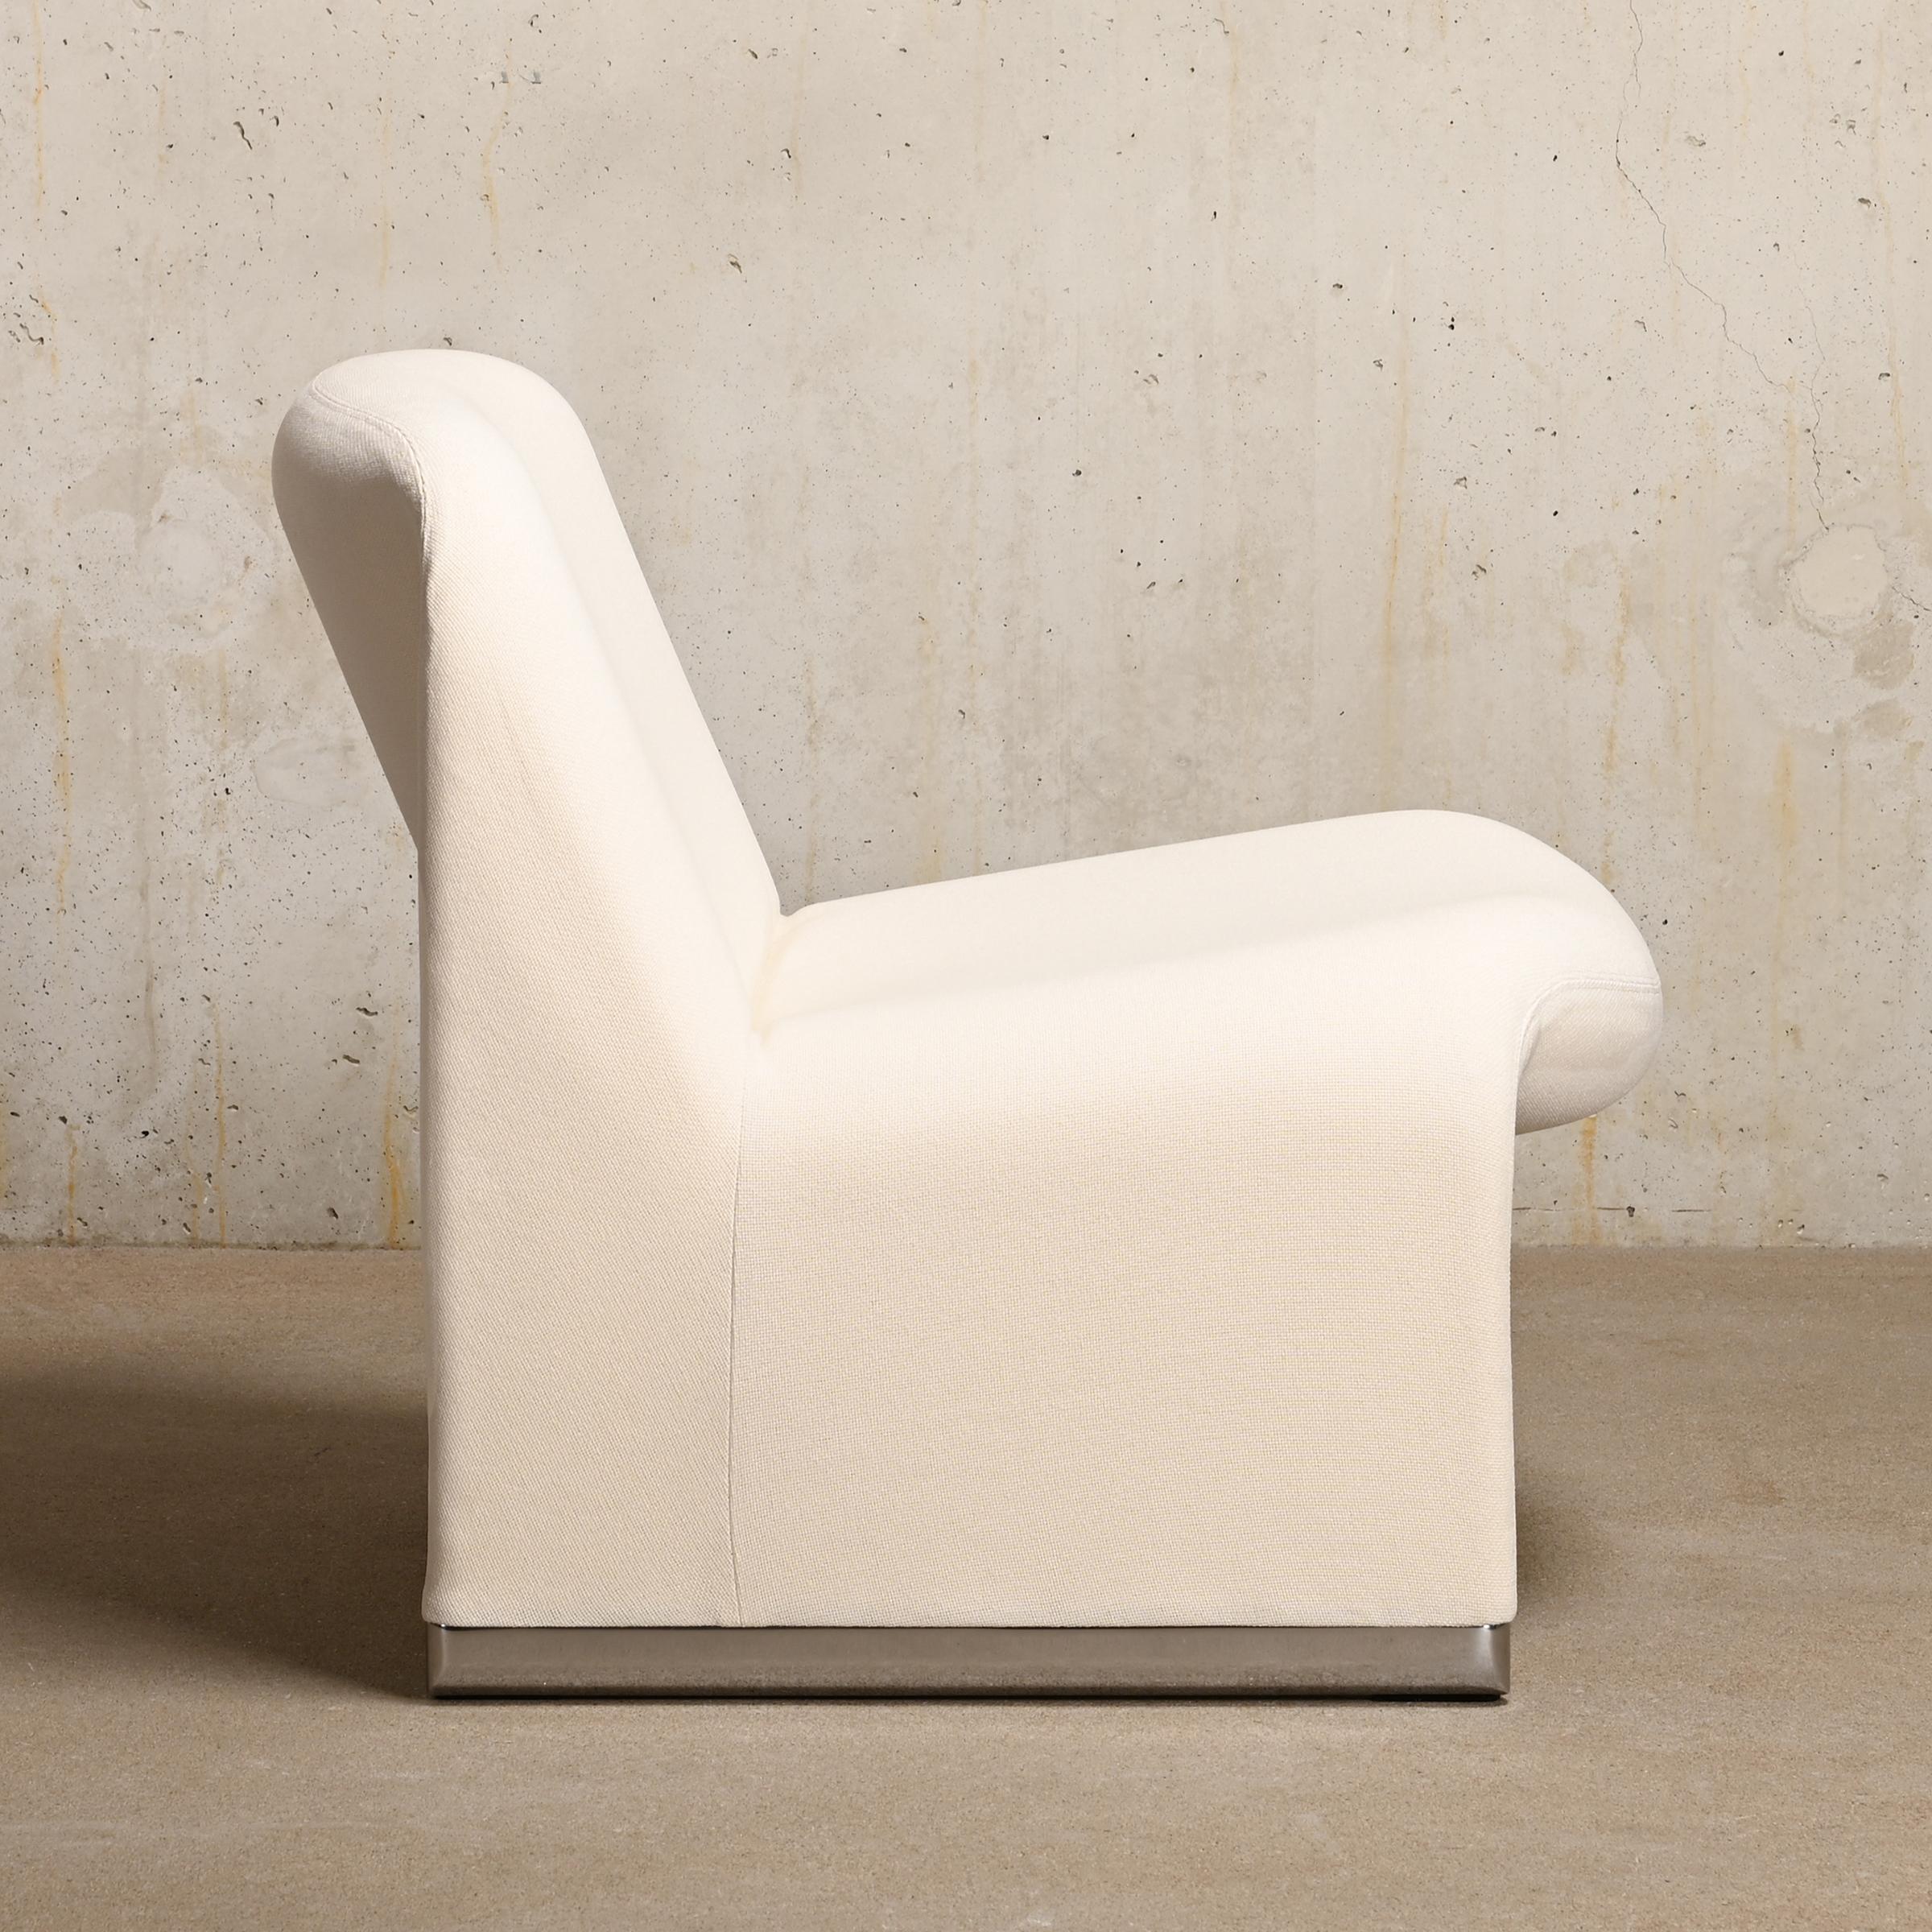 Mid-Century Modern Giancarlo Piretti Alky Lounge Chair in White Fabric for Anonima Castelli For Sale